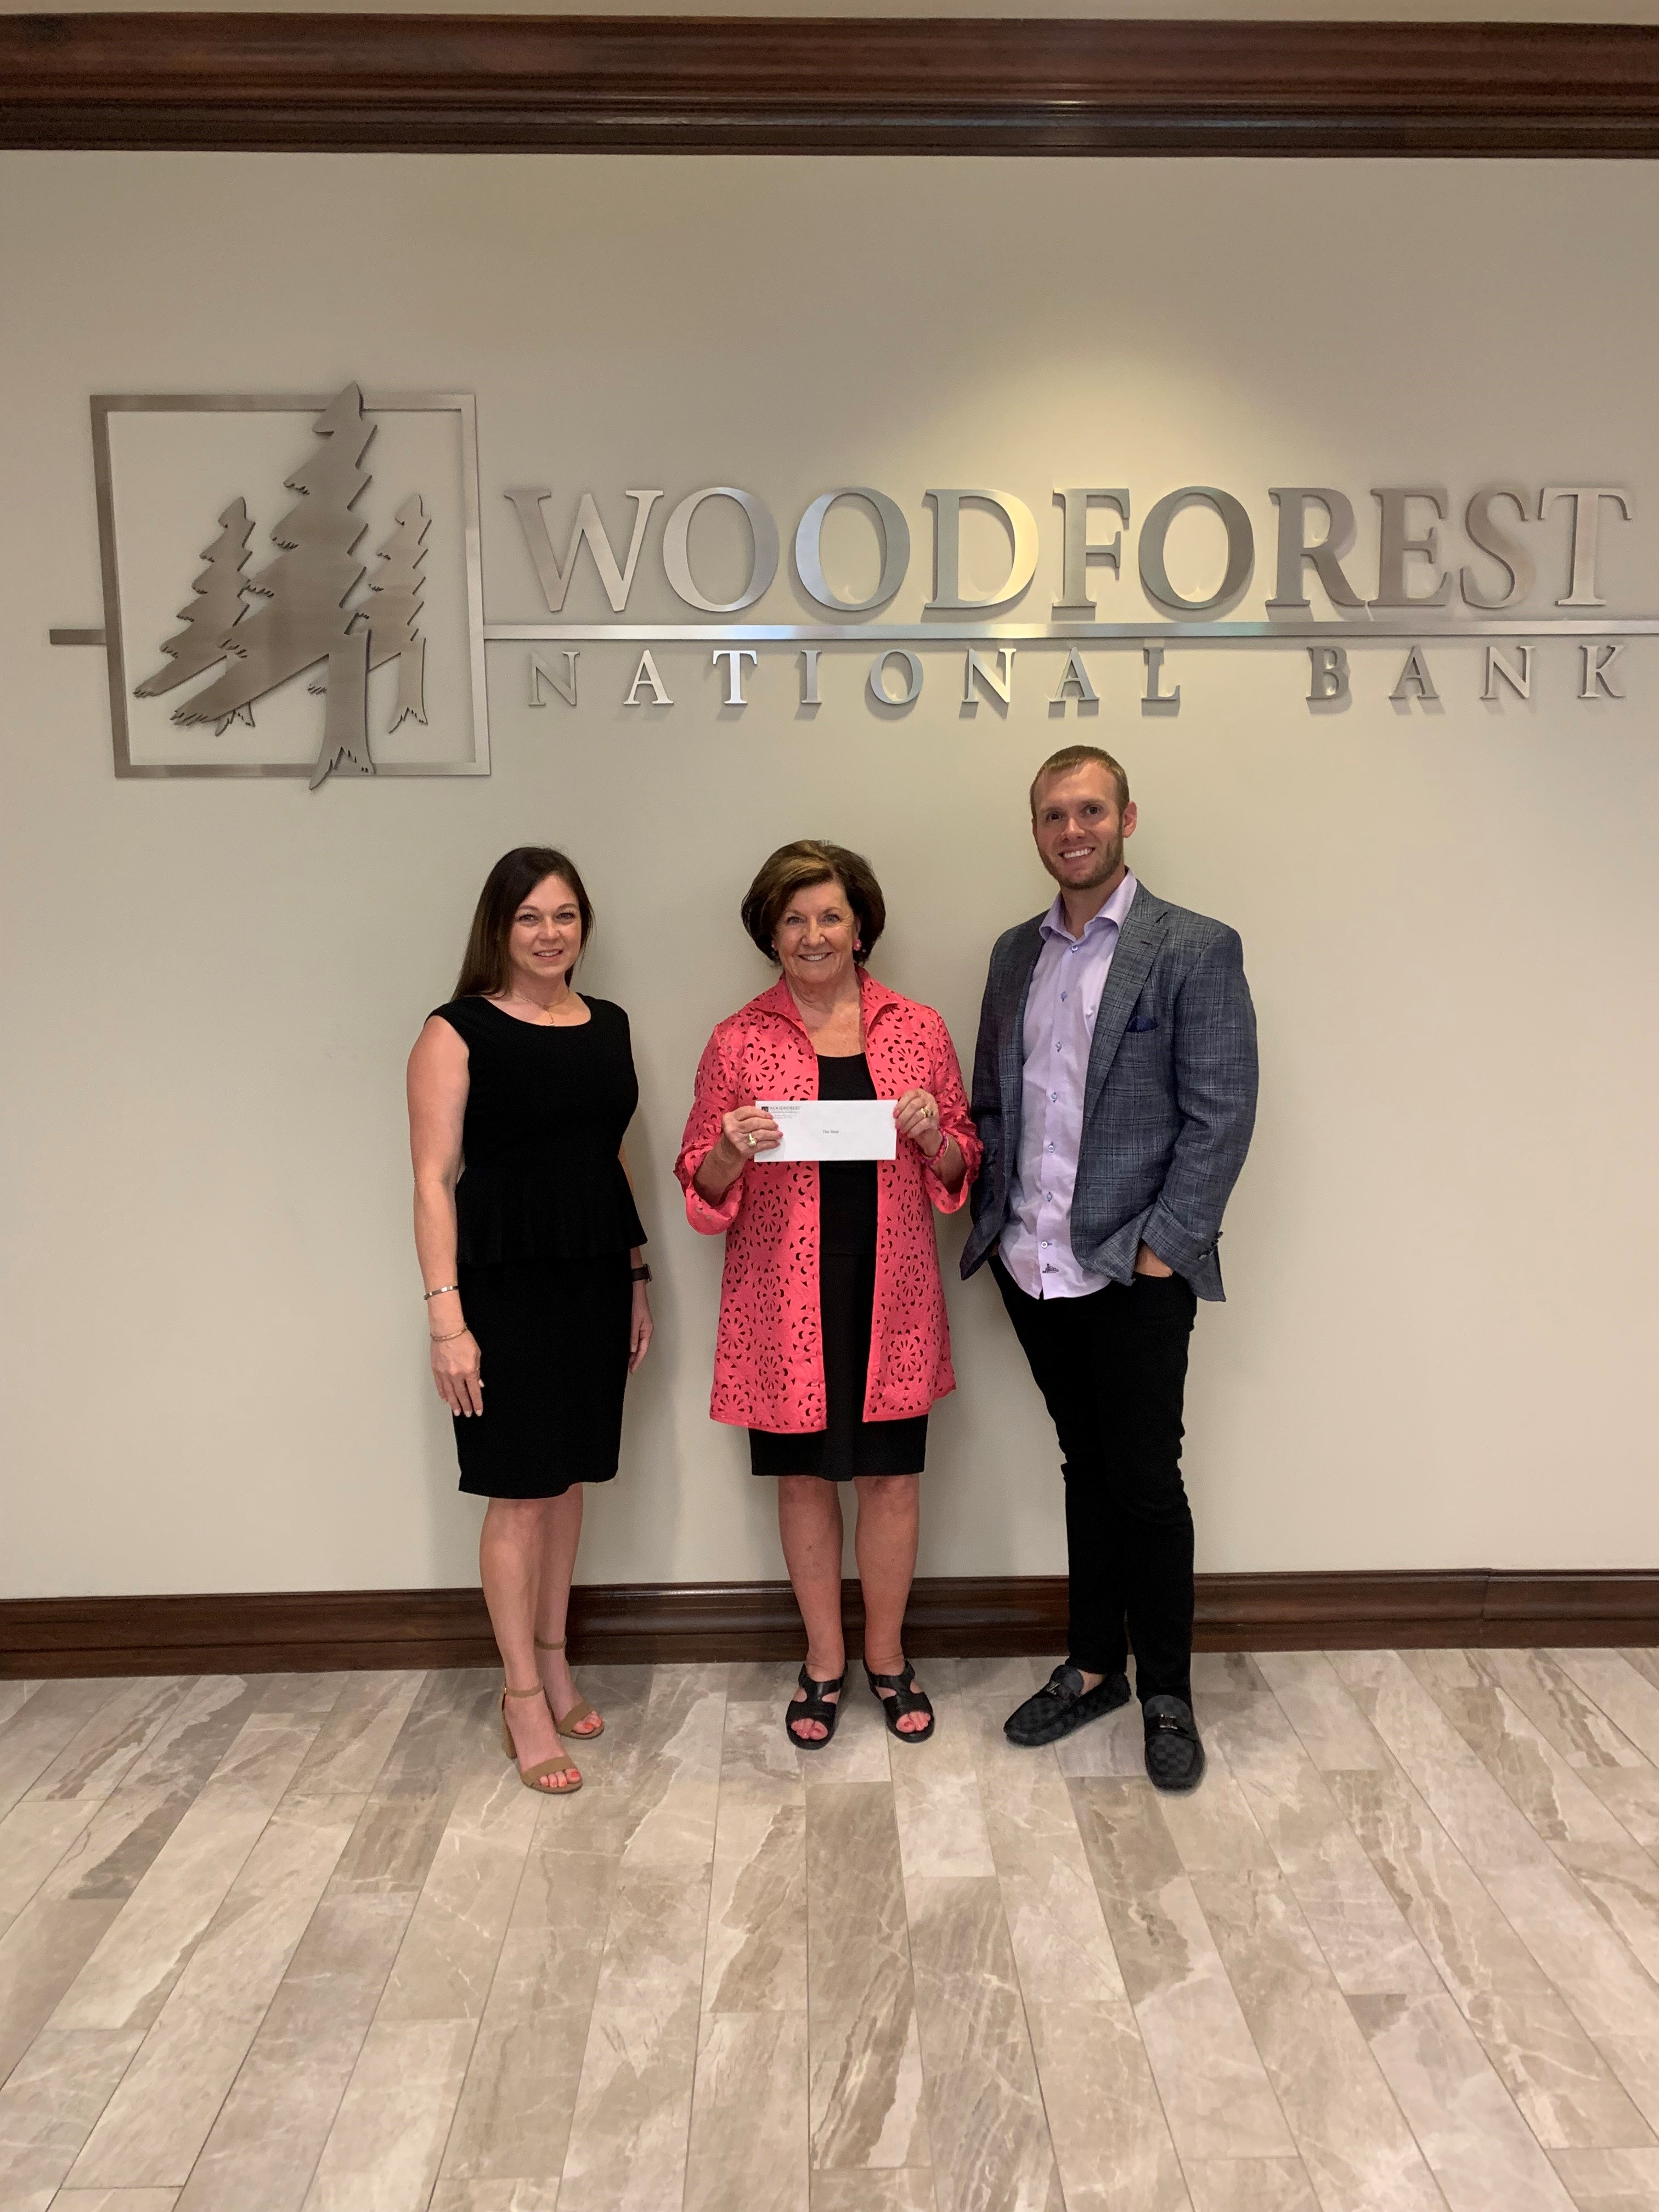 The Rose recently received a $20,000.00 donation from WCF.